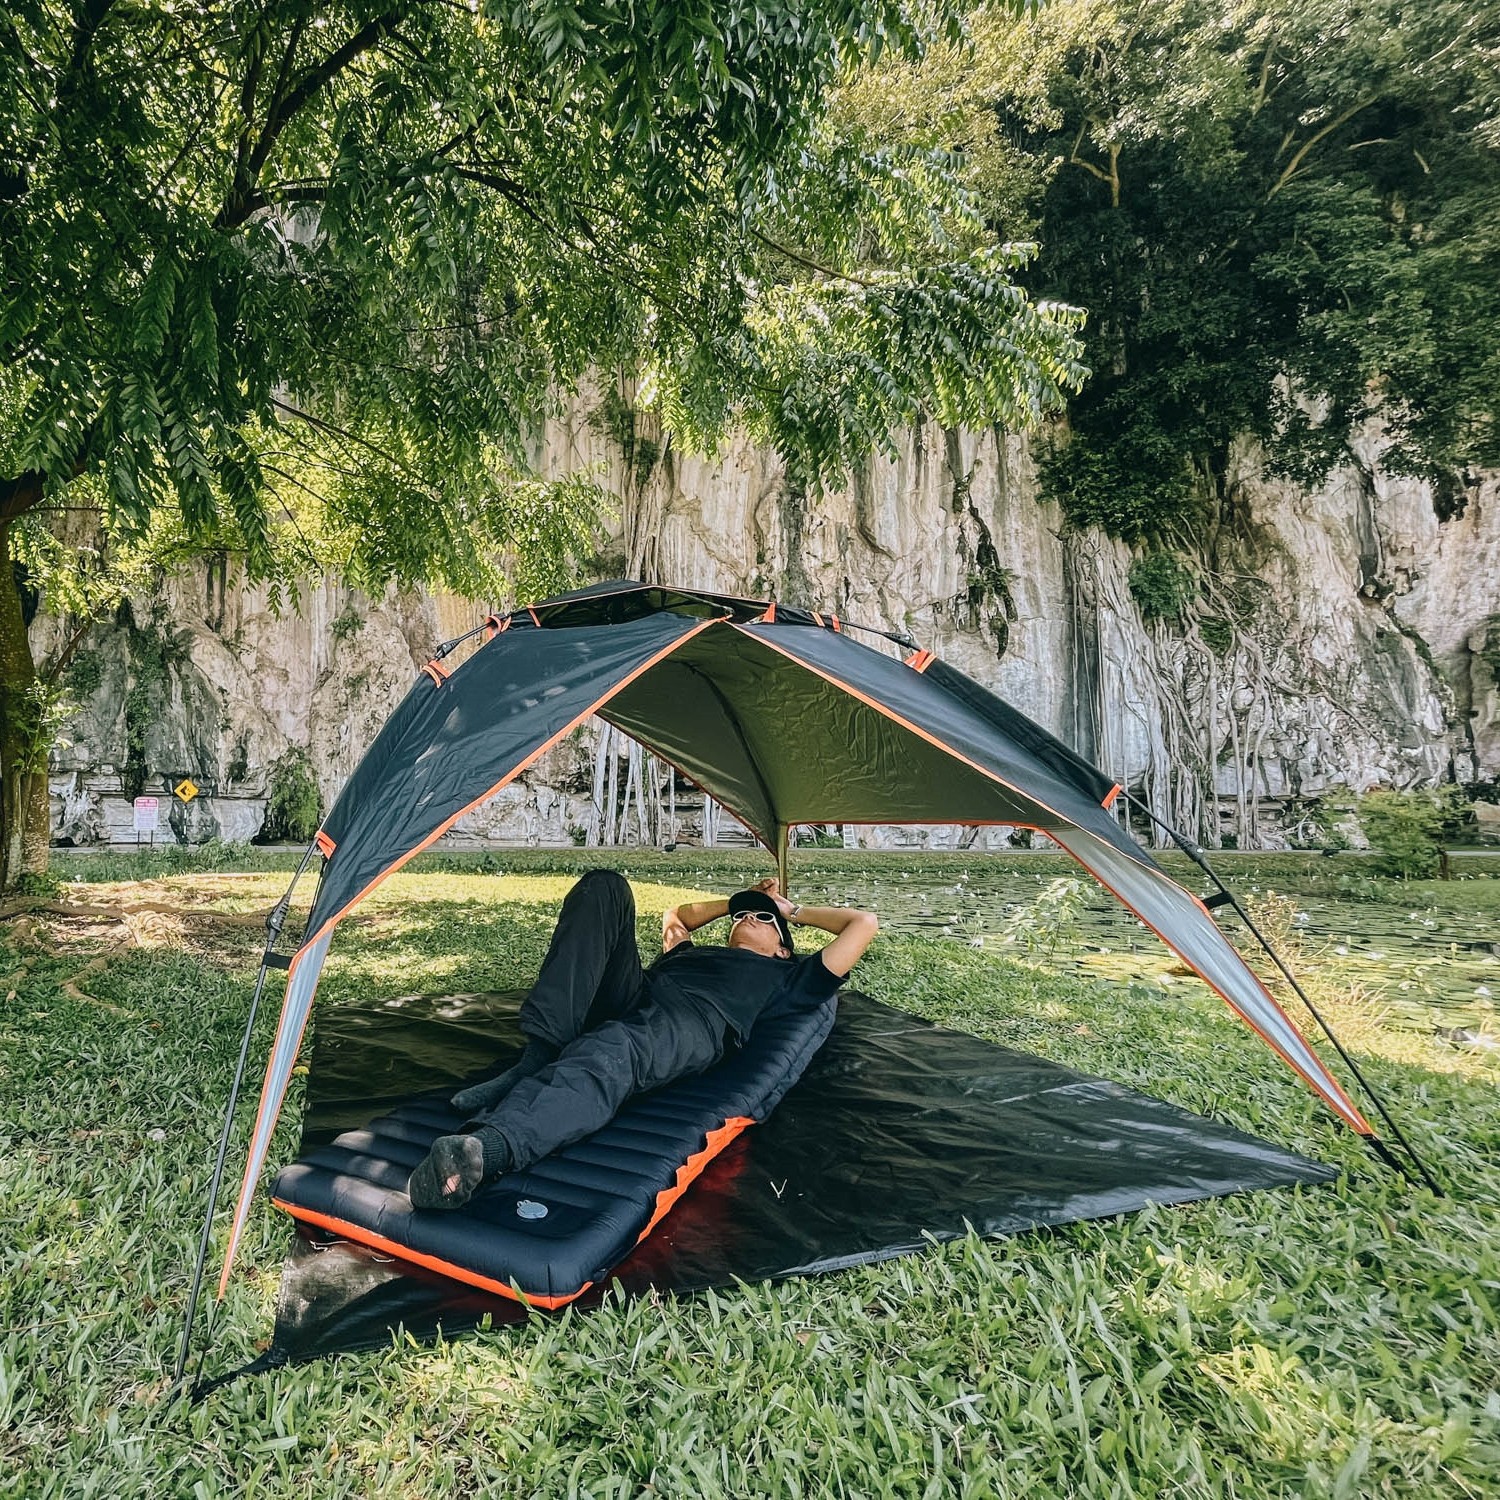 TAHAN Special Combo, PTT Outdoor, TAHAN Panthera 4 Automatic Tent 14,